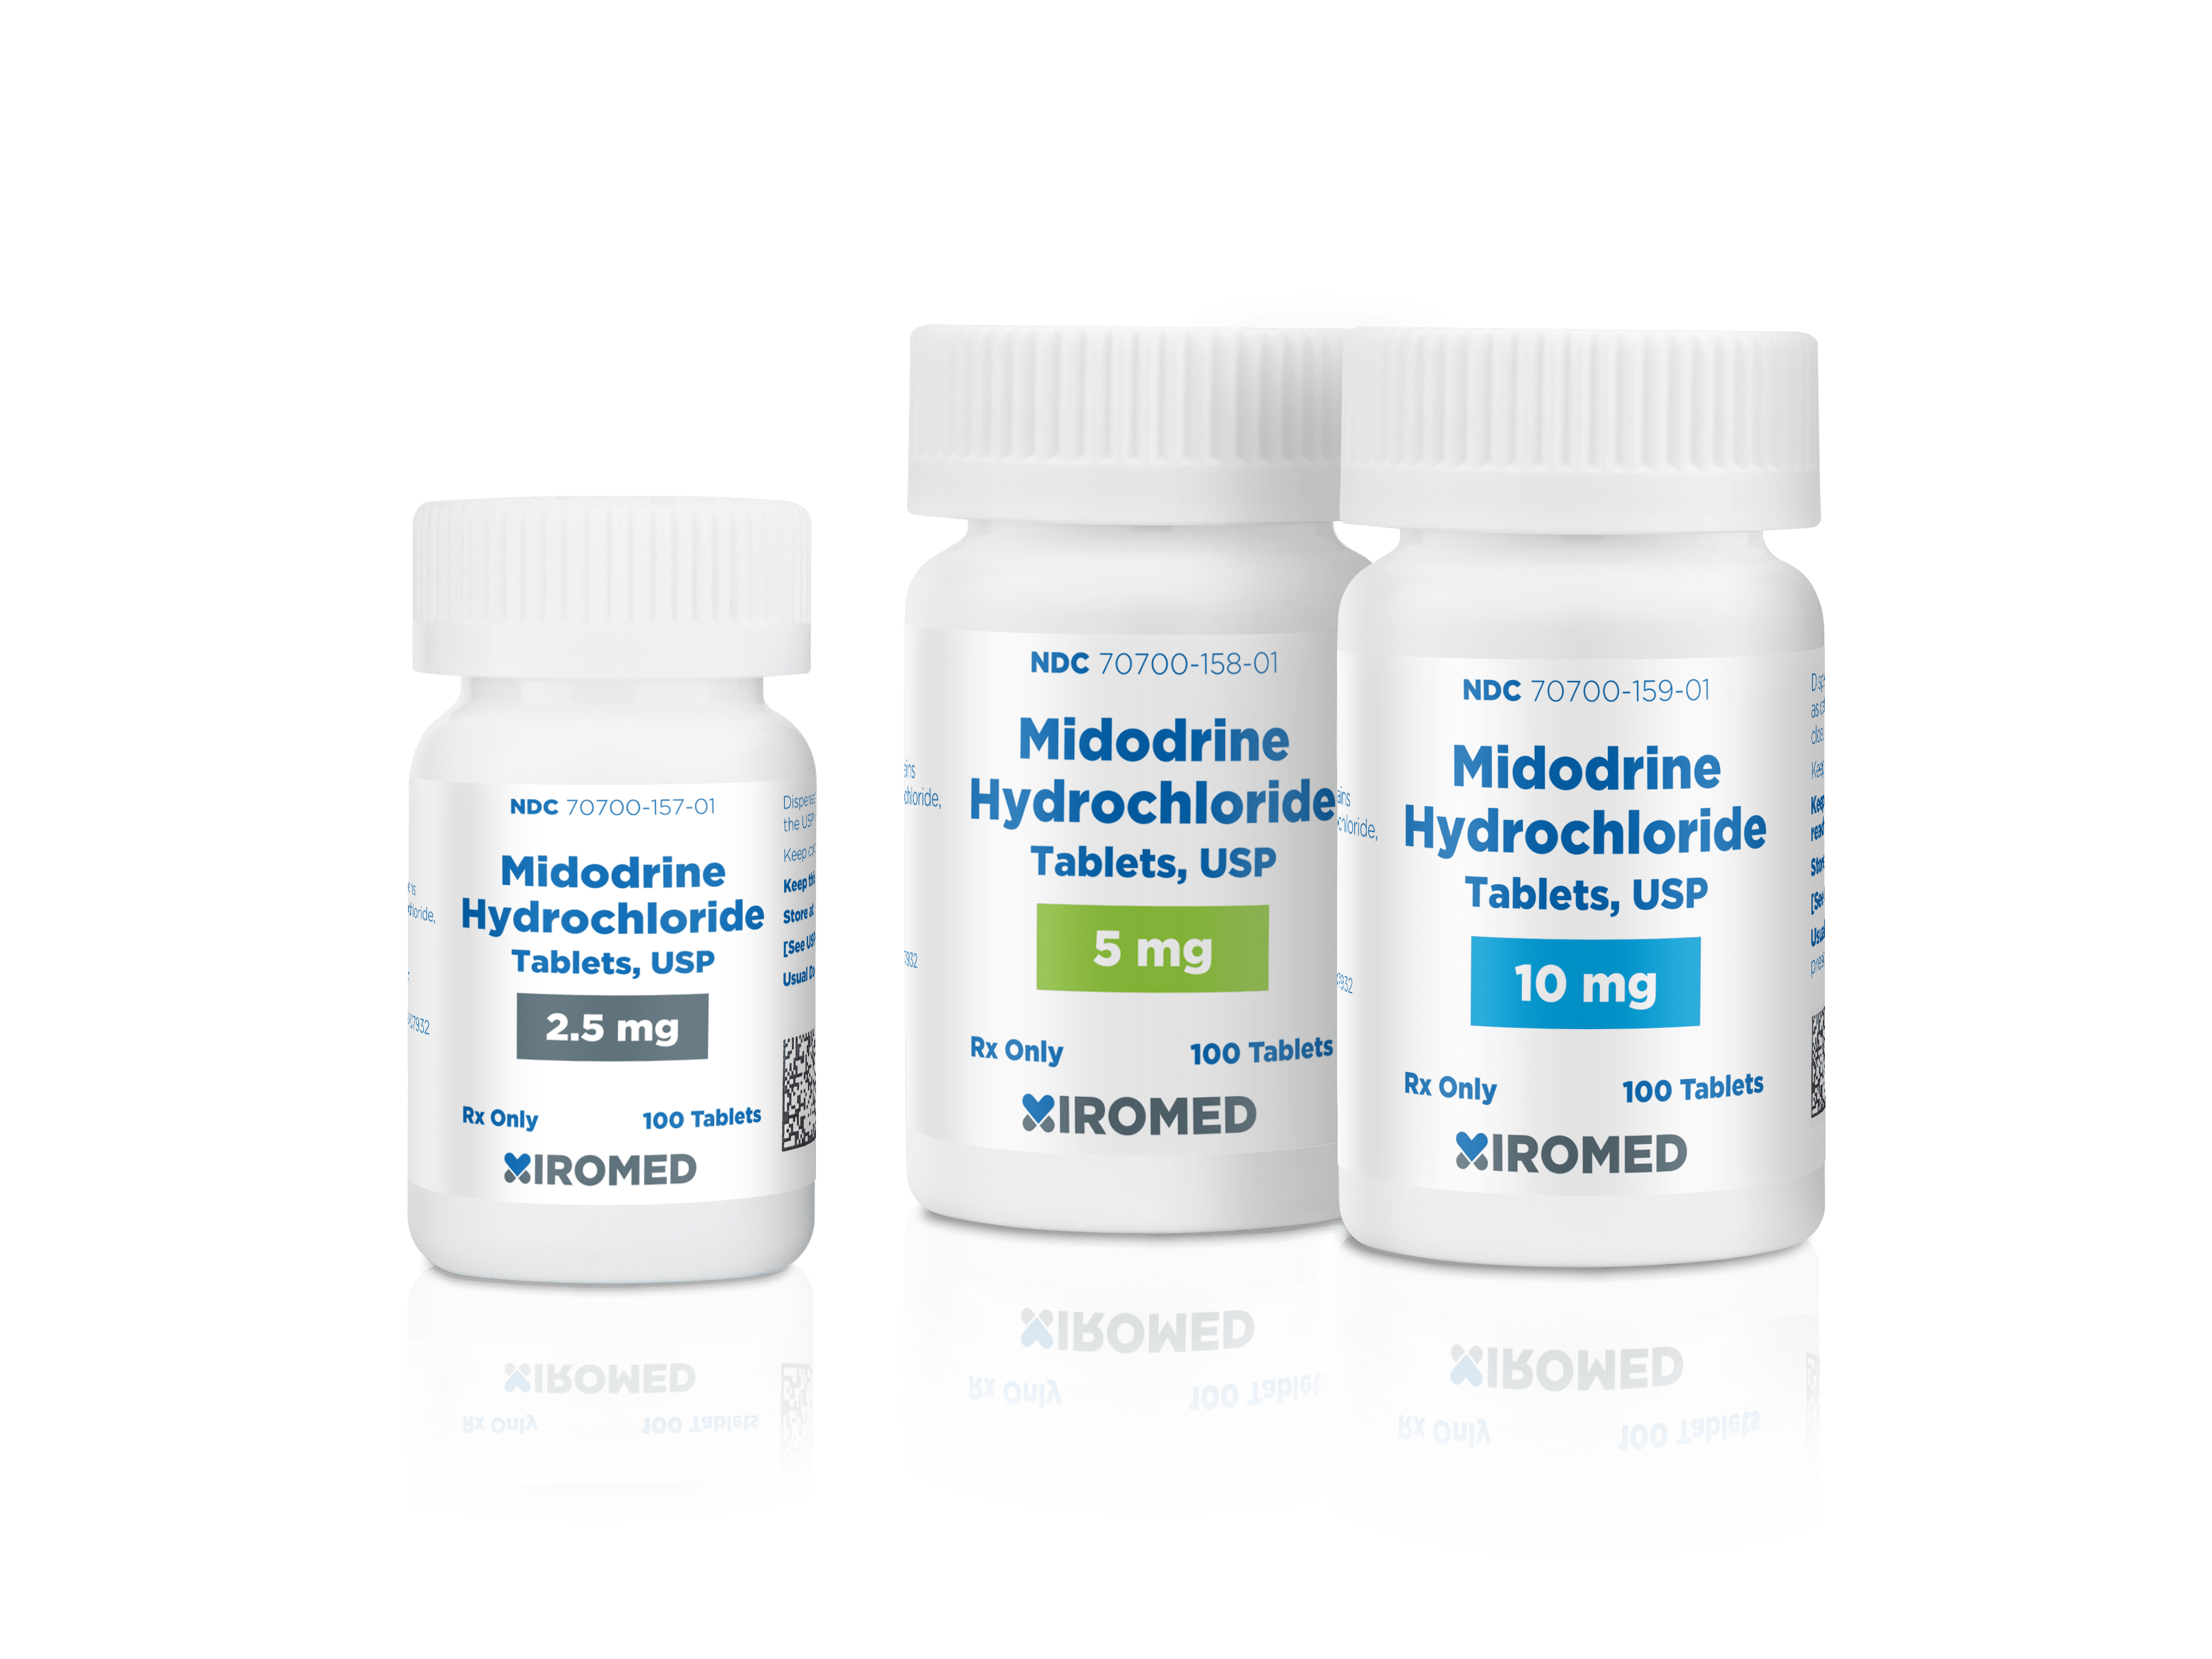 Midodrine Hydrochloride Drug Bnf Content Published By